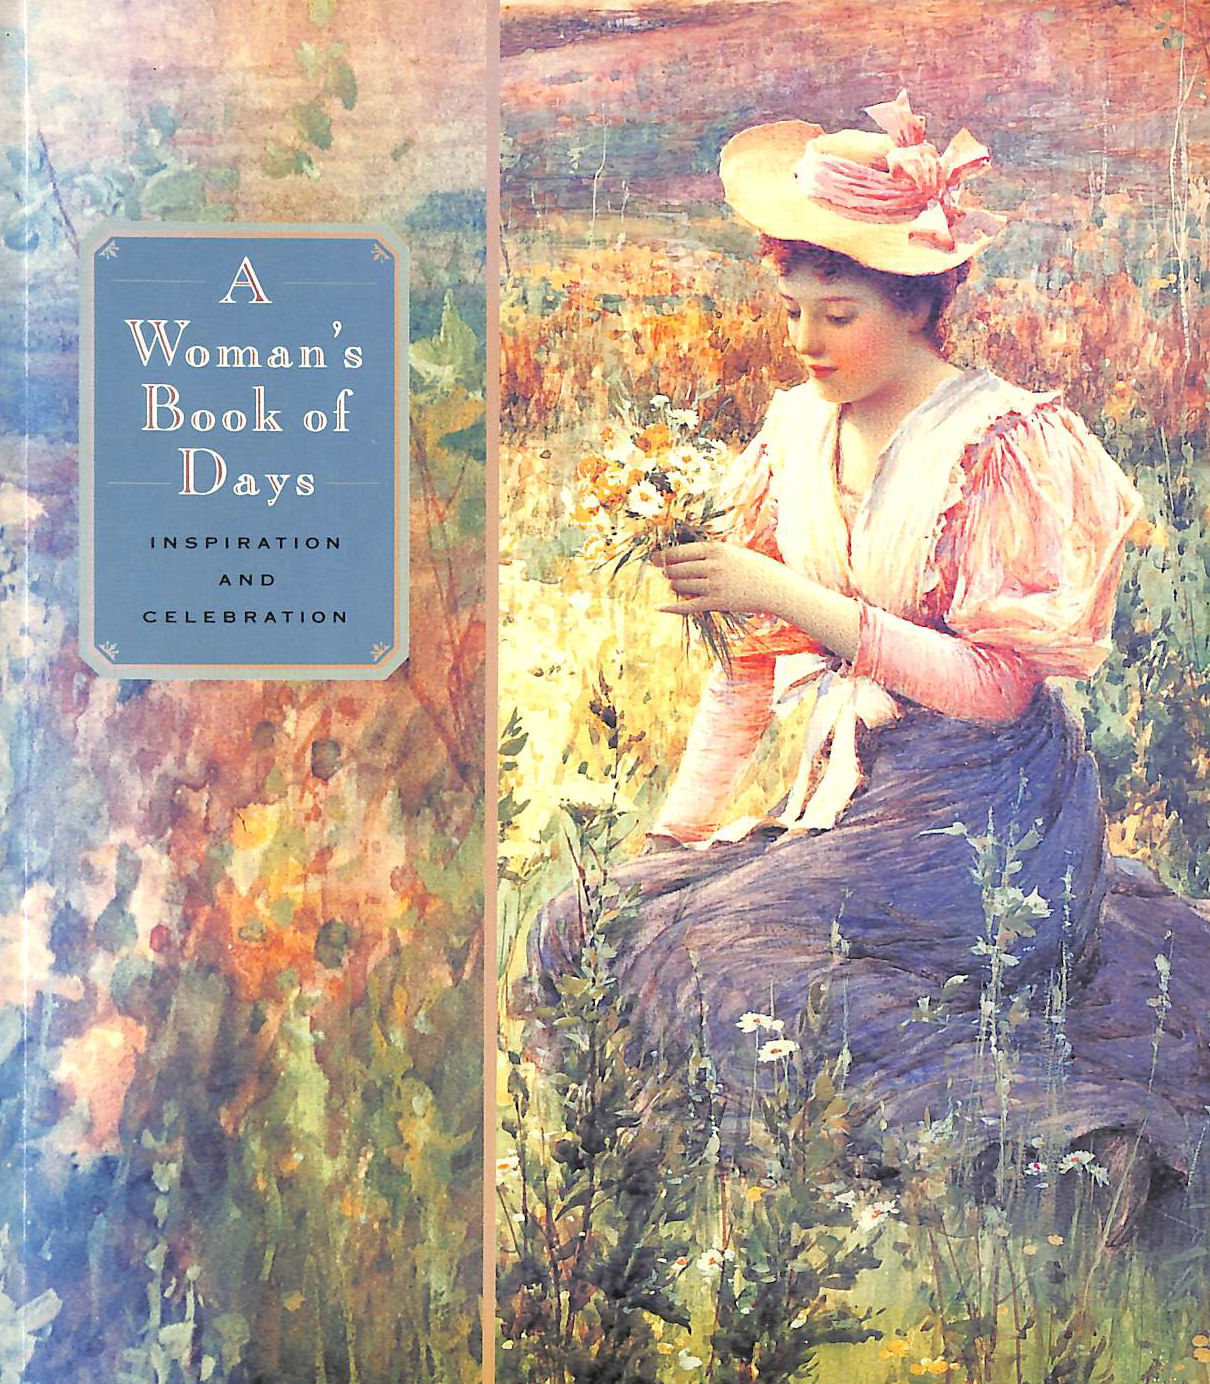 ISABEL ANDERS ET AL [ILLUSTRATOR] - A Woman's Book of Days